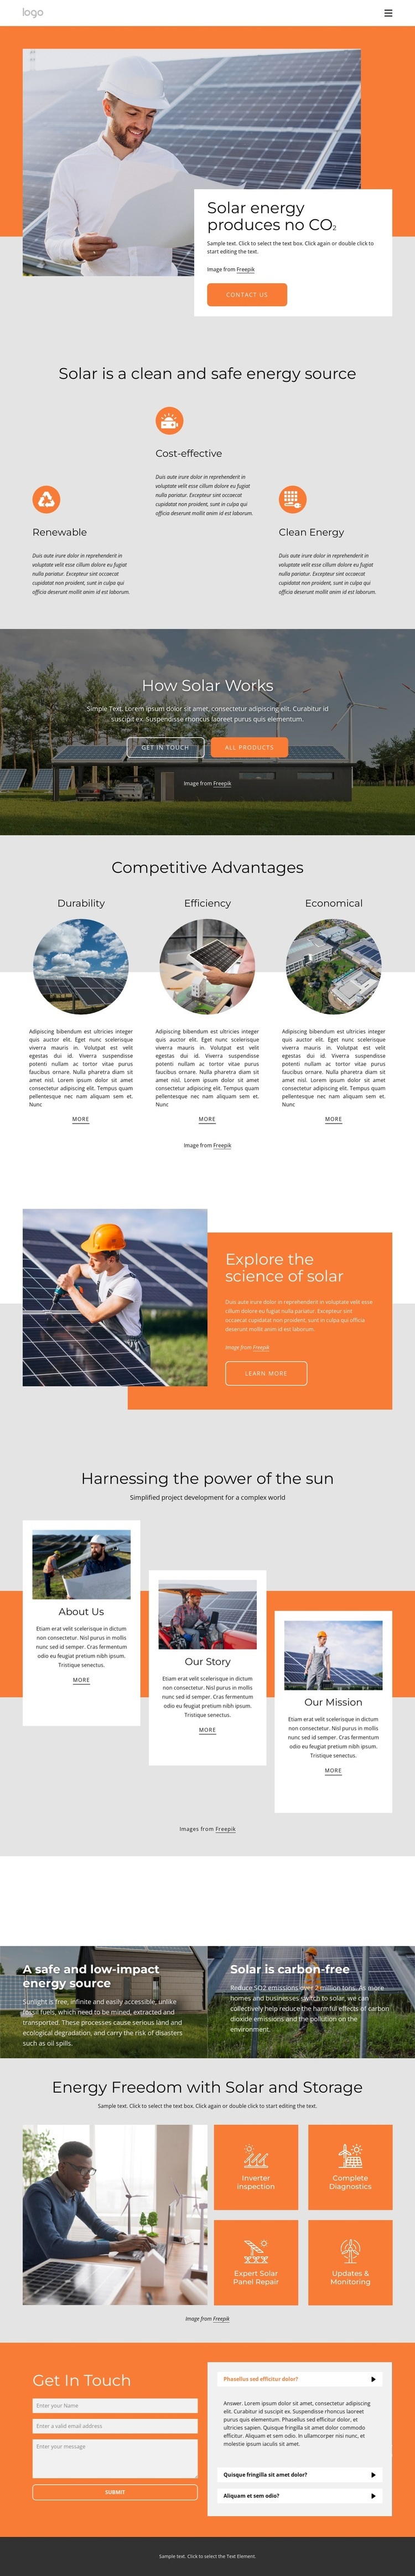 Power your home with clean solar energy Squarespace Template Alternative